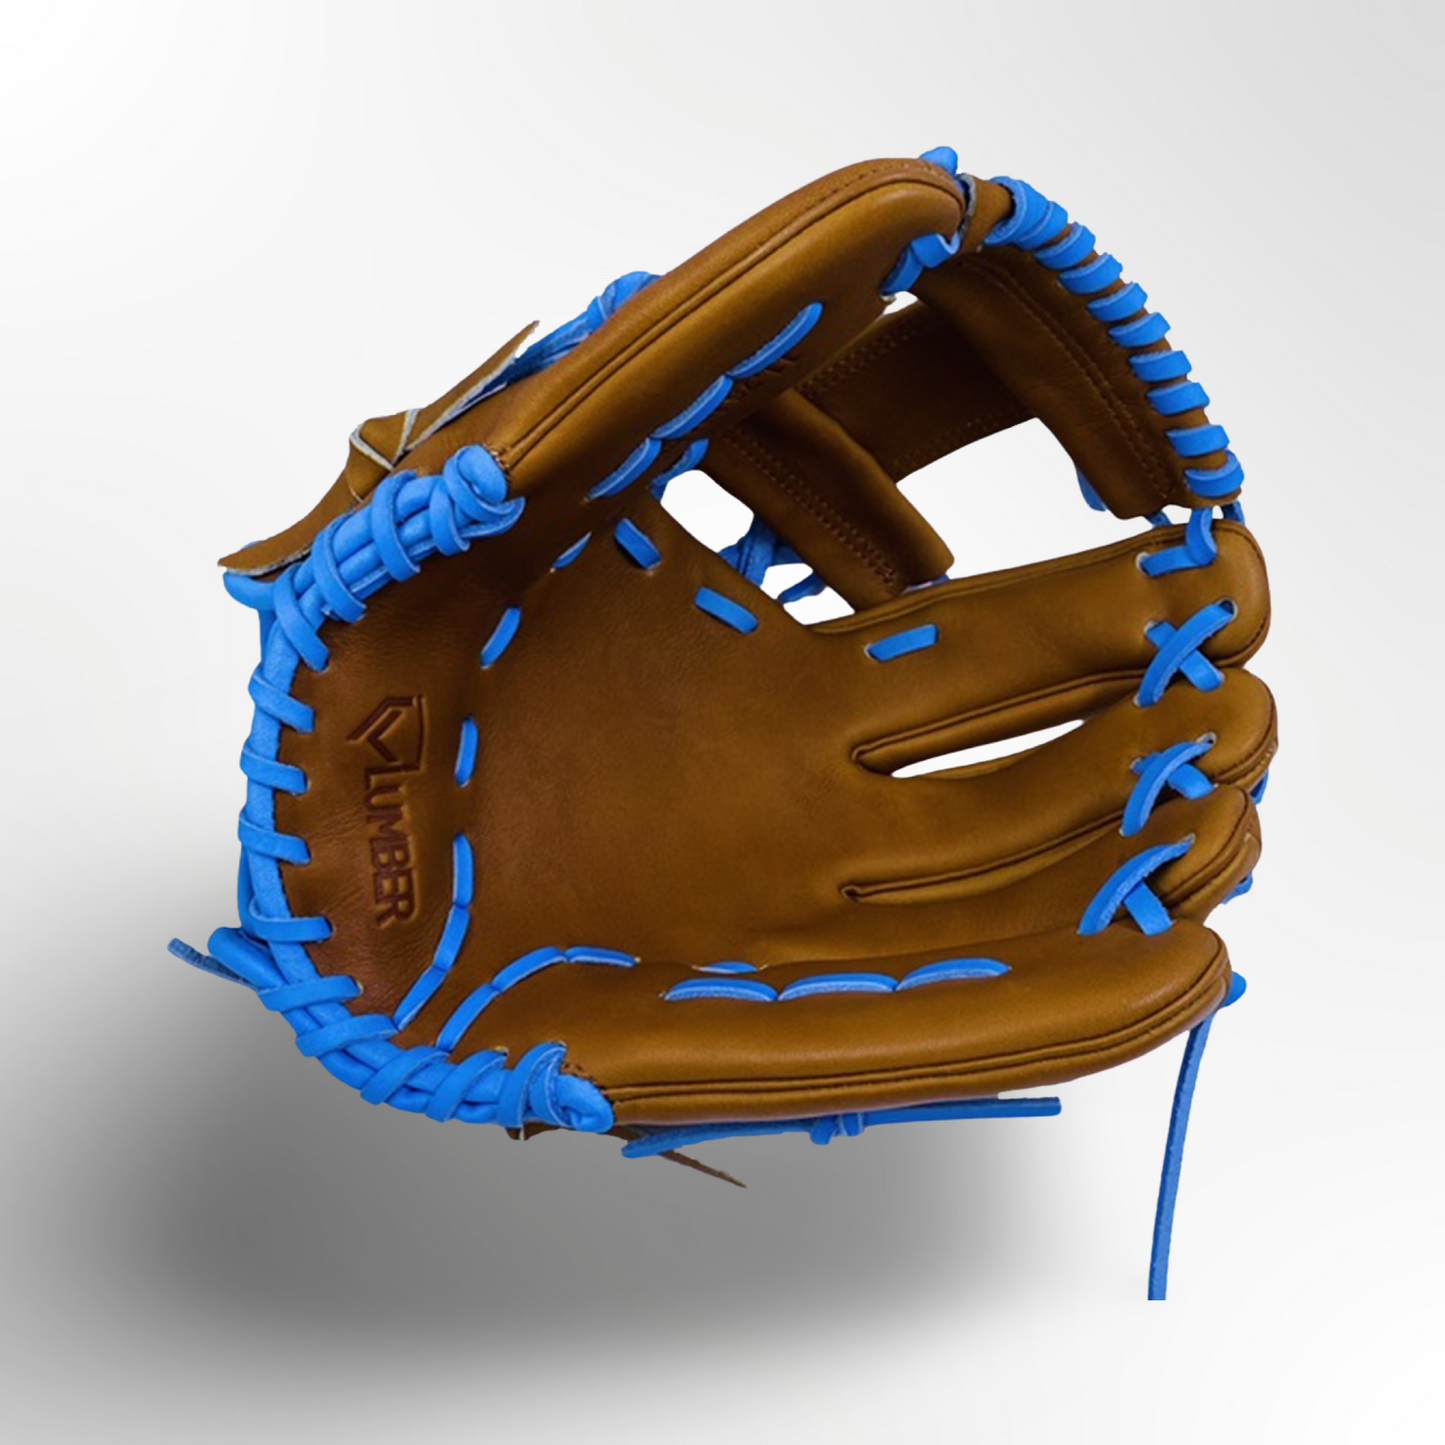 11.75" Middle Infield Glove